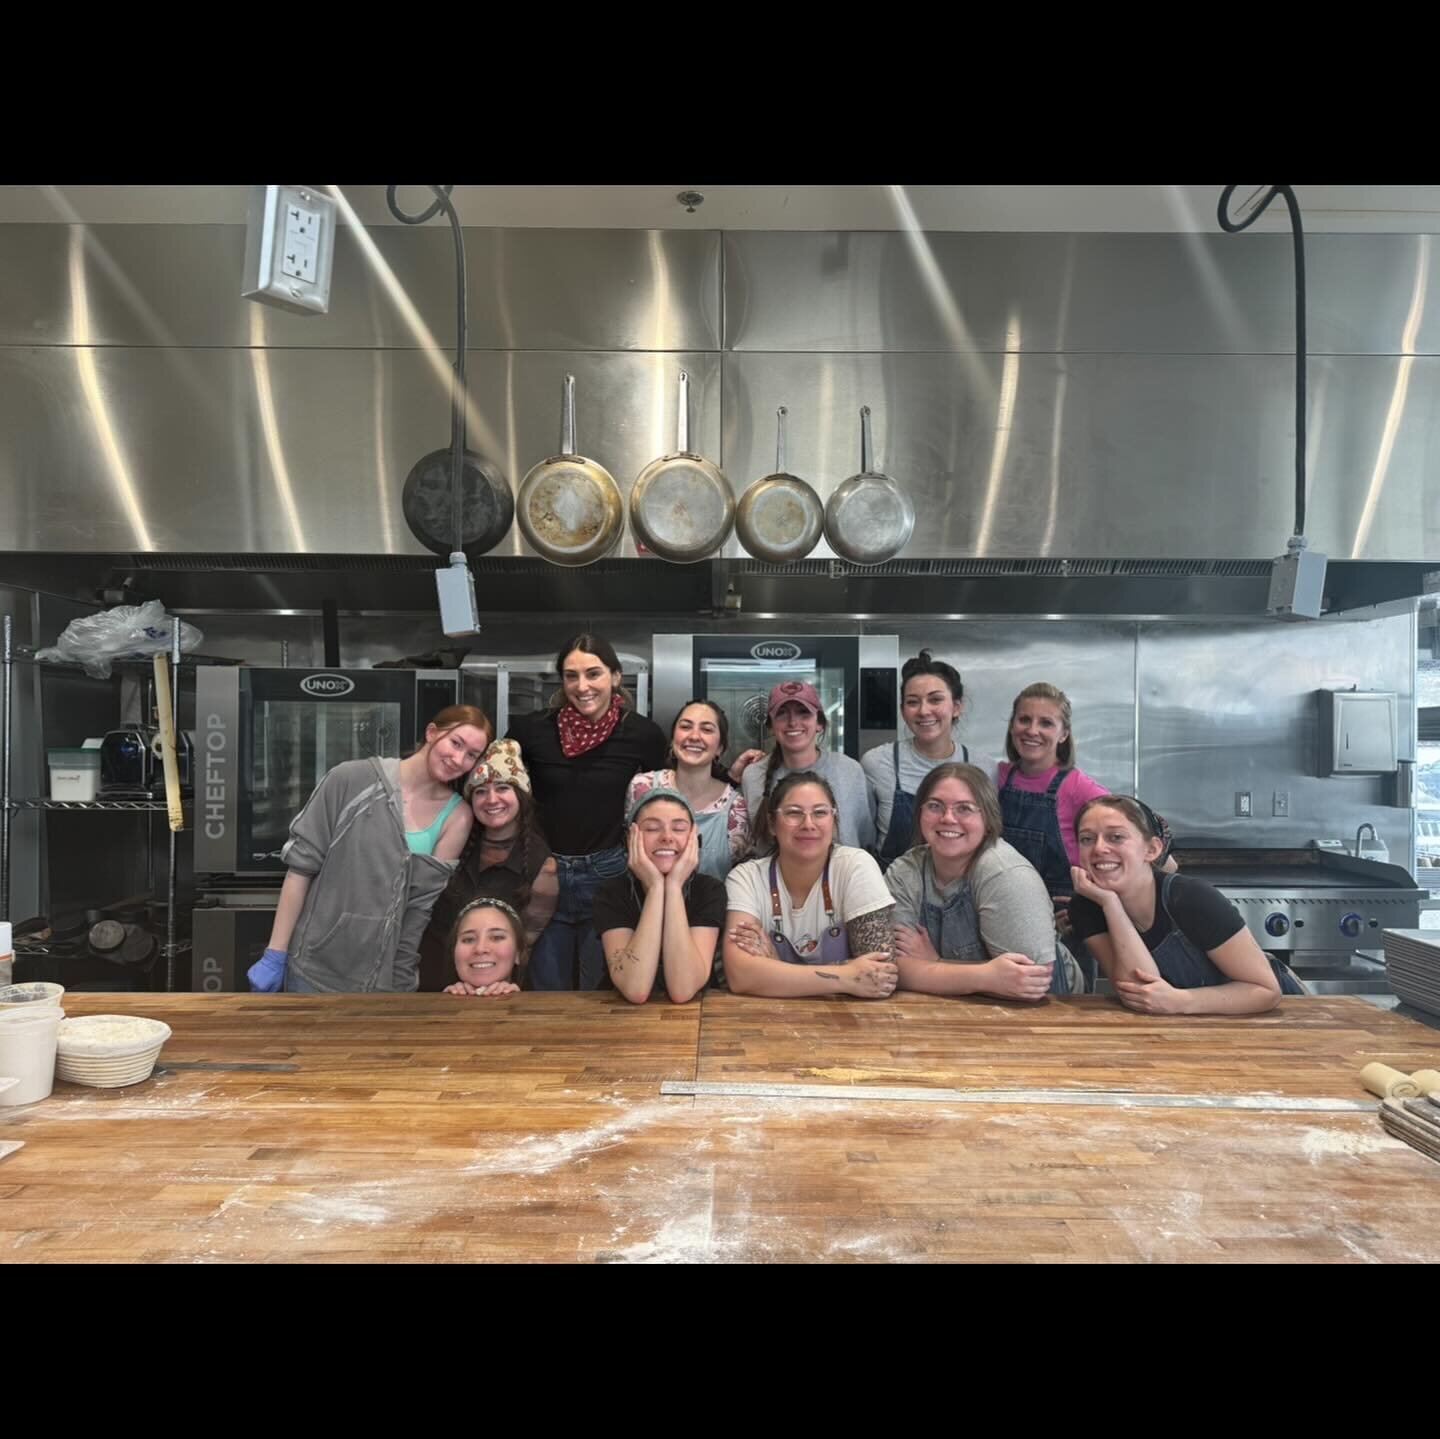 Everyday is international women&rsquo;s day over here. Missing a few faces today (and couldn&rsquo;t include the gals at the bagel shop - you guys rock), but these are the people that make our place what it is. ❤️